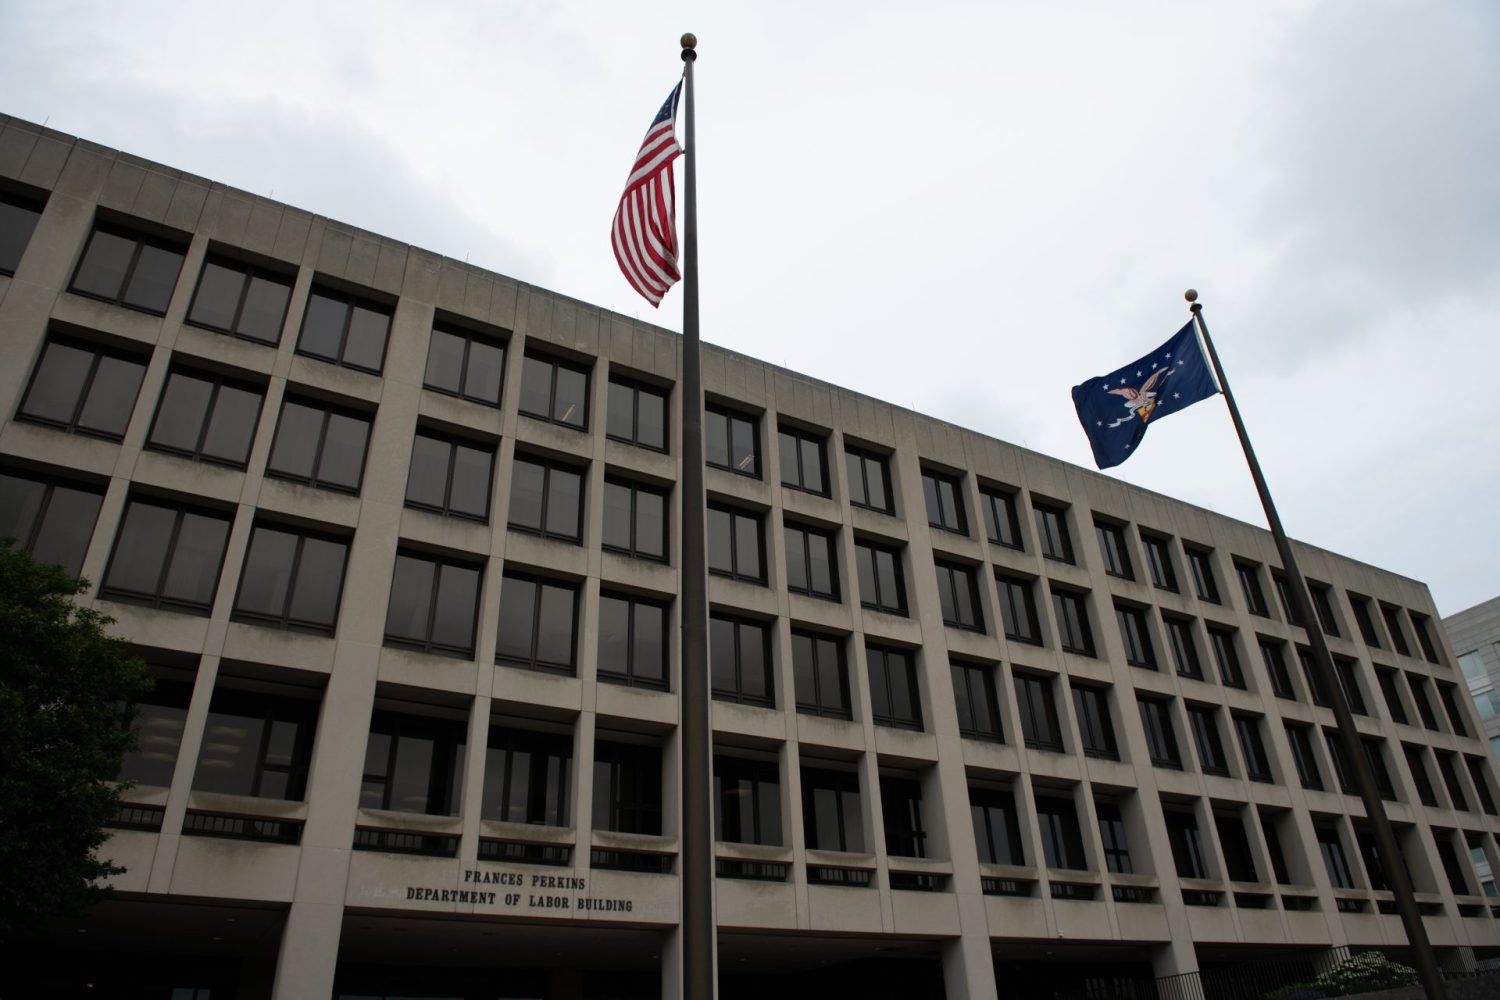 A general view of the U.S. Department of Labor in Washington, D.C., on May 28, 2020 amid the Coronavirus pandemic. This week marked 100,000 confirmed COVID-19 deaths in the United States, as outbreaks accelerated in more than a dozen states and many countries across the global south according to reports. (Graeme Sloan/Sipa USA)No Use UK. No Use Germany.